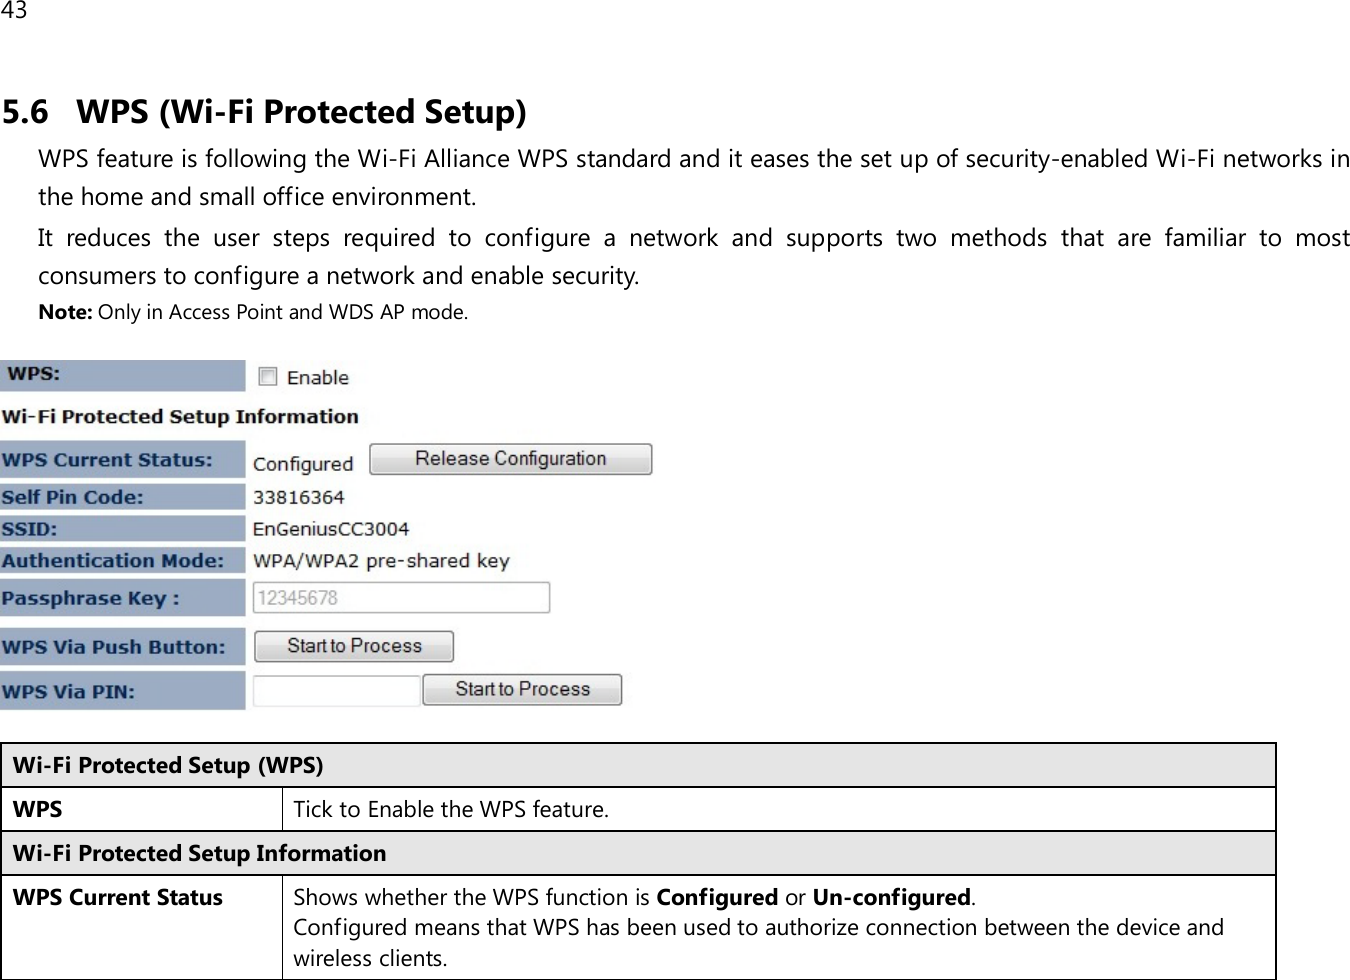 43  5.6 WPS (Wi-Fi Protected Setup) WPS feature is following the Wi-Fi Alliance WPS standard and it eases the set up of security-enabled Wi-Fi networks in the home and small office environment.  It reduces the user steps required to configure a network and supports two methods that are familiar to most consumers to configure a network and enable security. Note: Only in Access Point and WDS AP mode.    Wi-Fi Protected Setup (WPS) WPS Tick to Enable the WPS feature. Wi-Fi Protected Setup Information WPS Current Status Shows whether the WPS function is Configured or Un-configured. Configured means that WPS has been used to authorize connection between the device and wireless clients. 